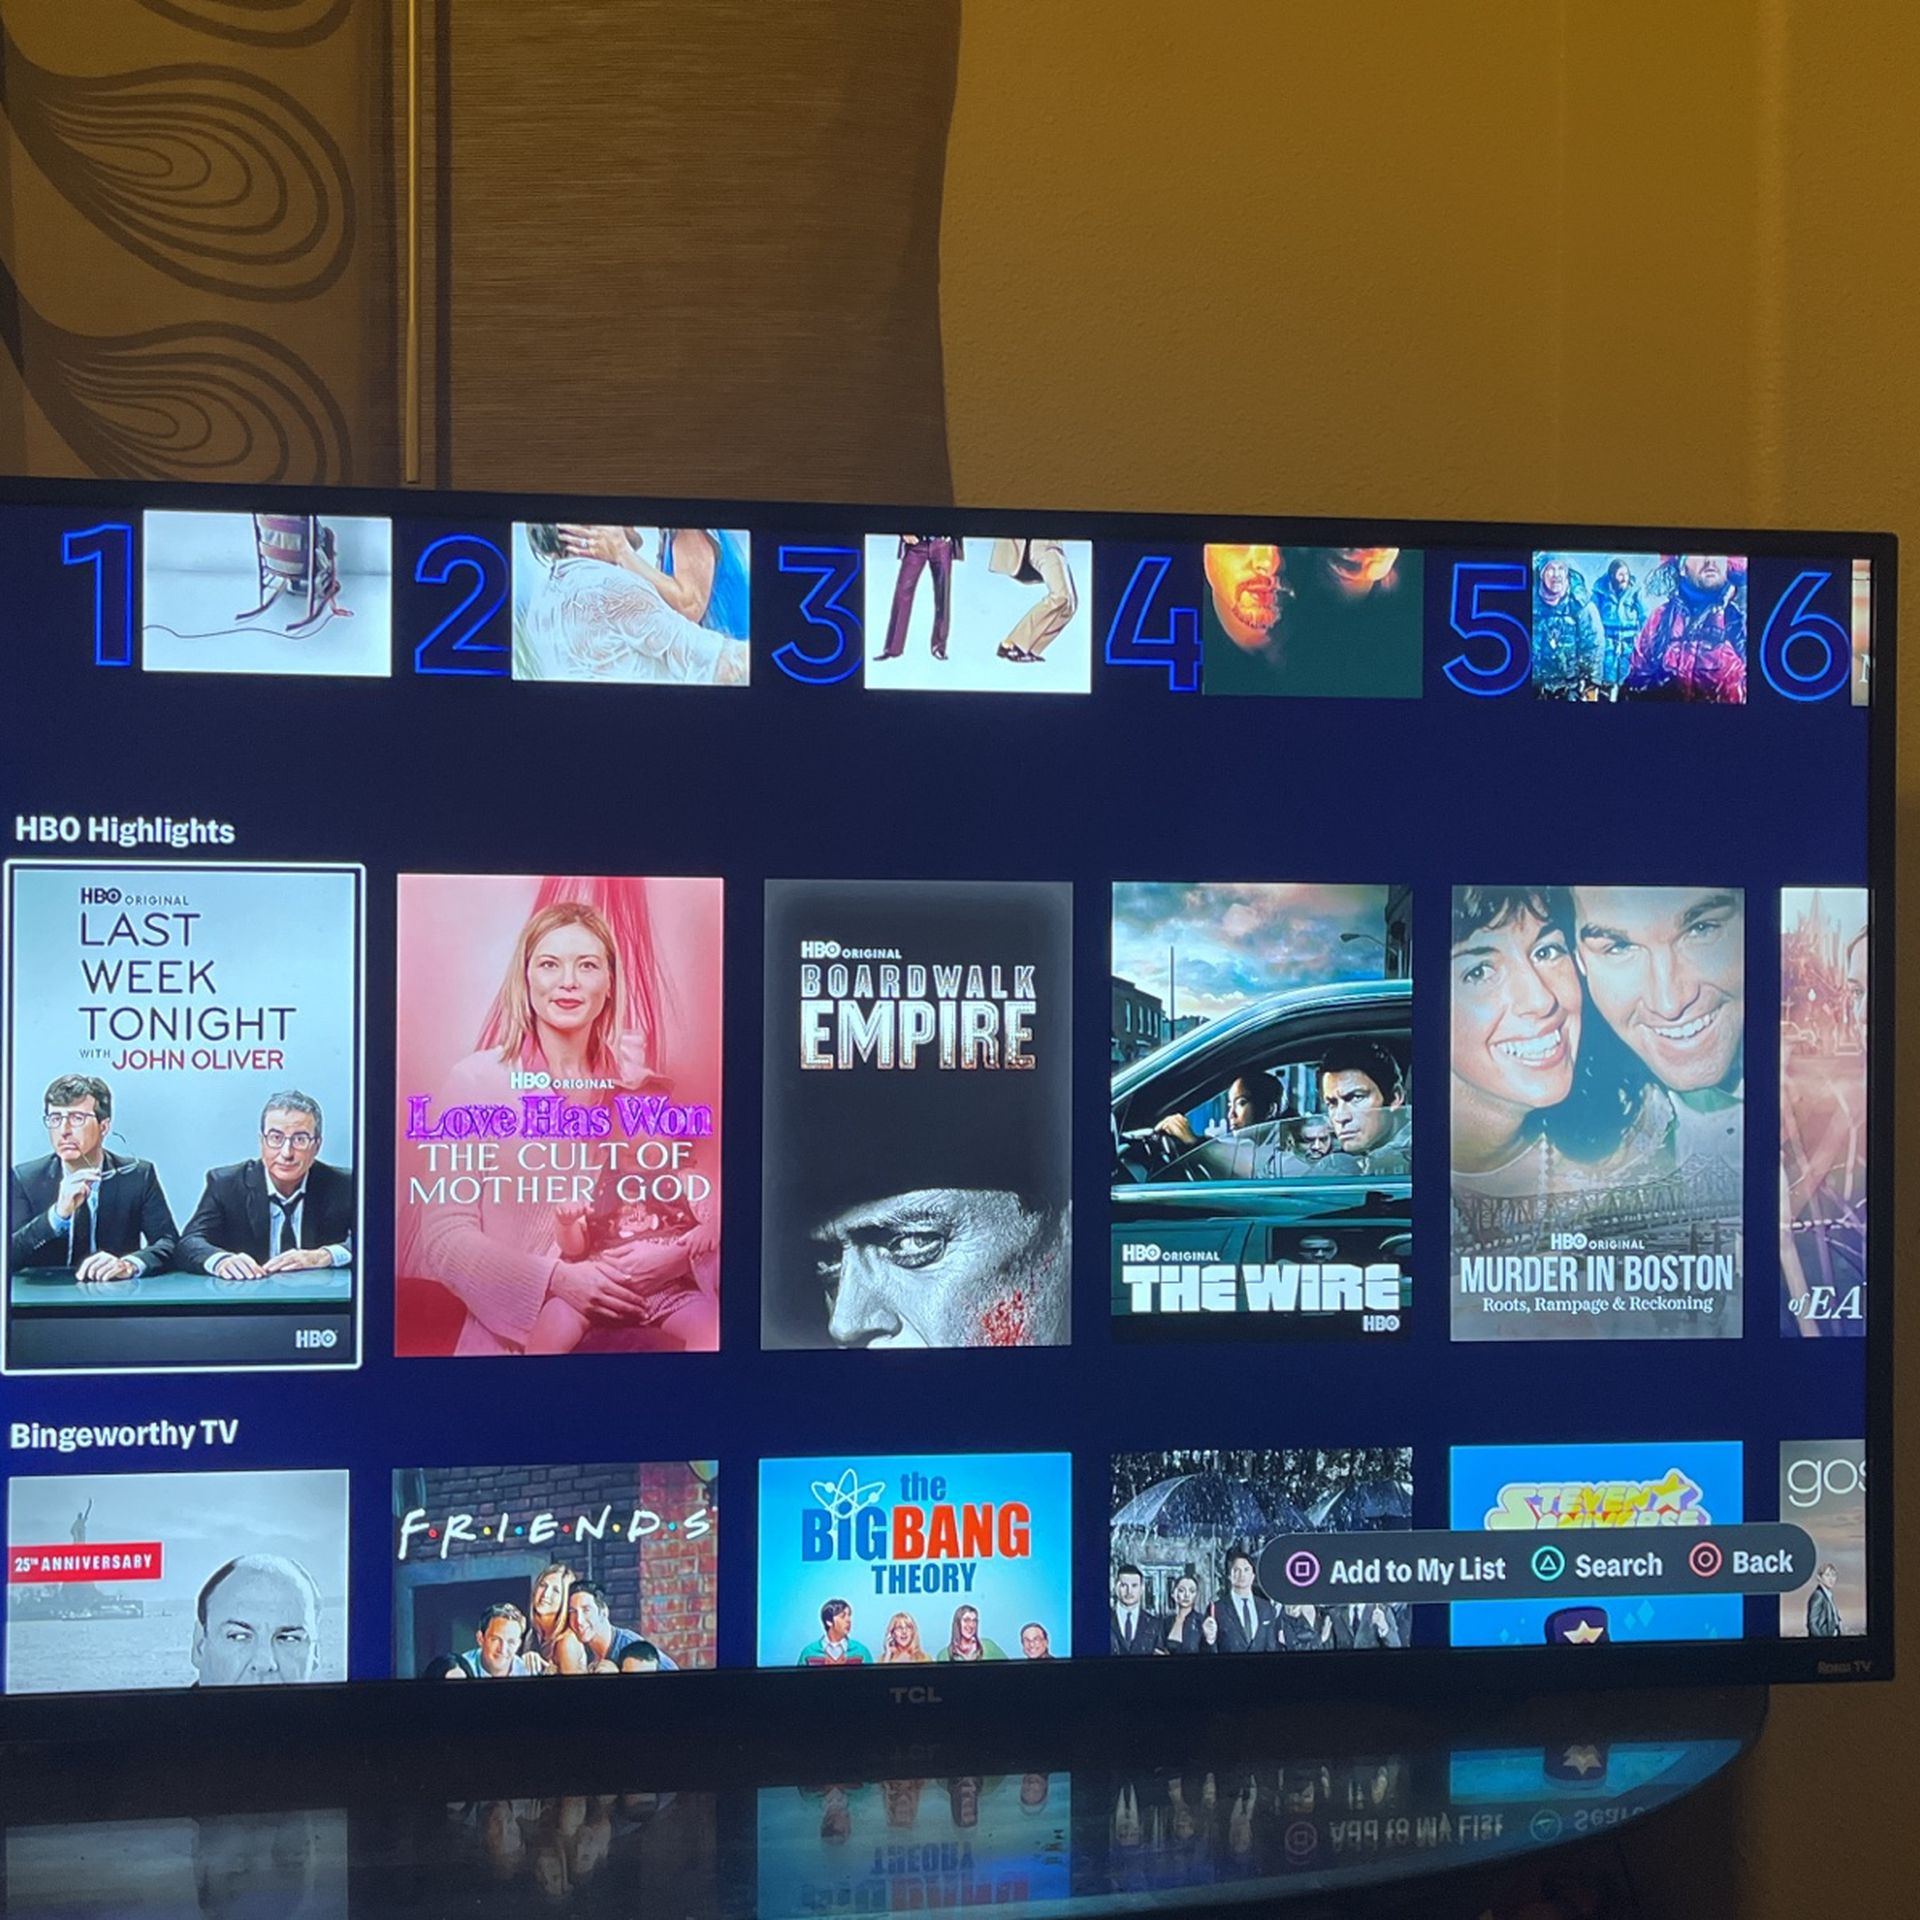 40 inch Roku Smart TV HDR 4k With Remote